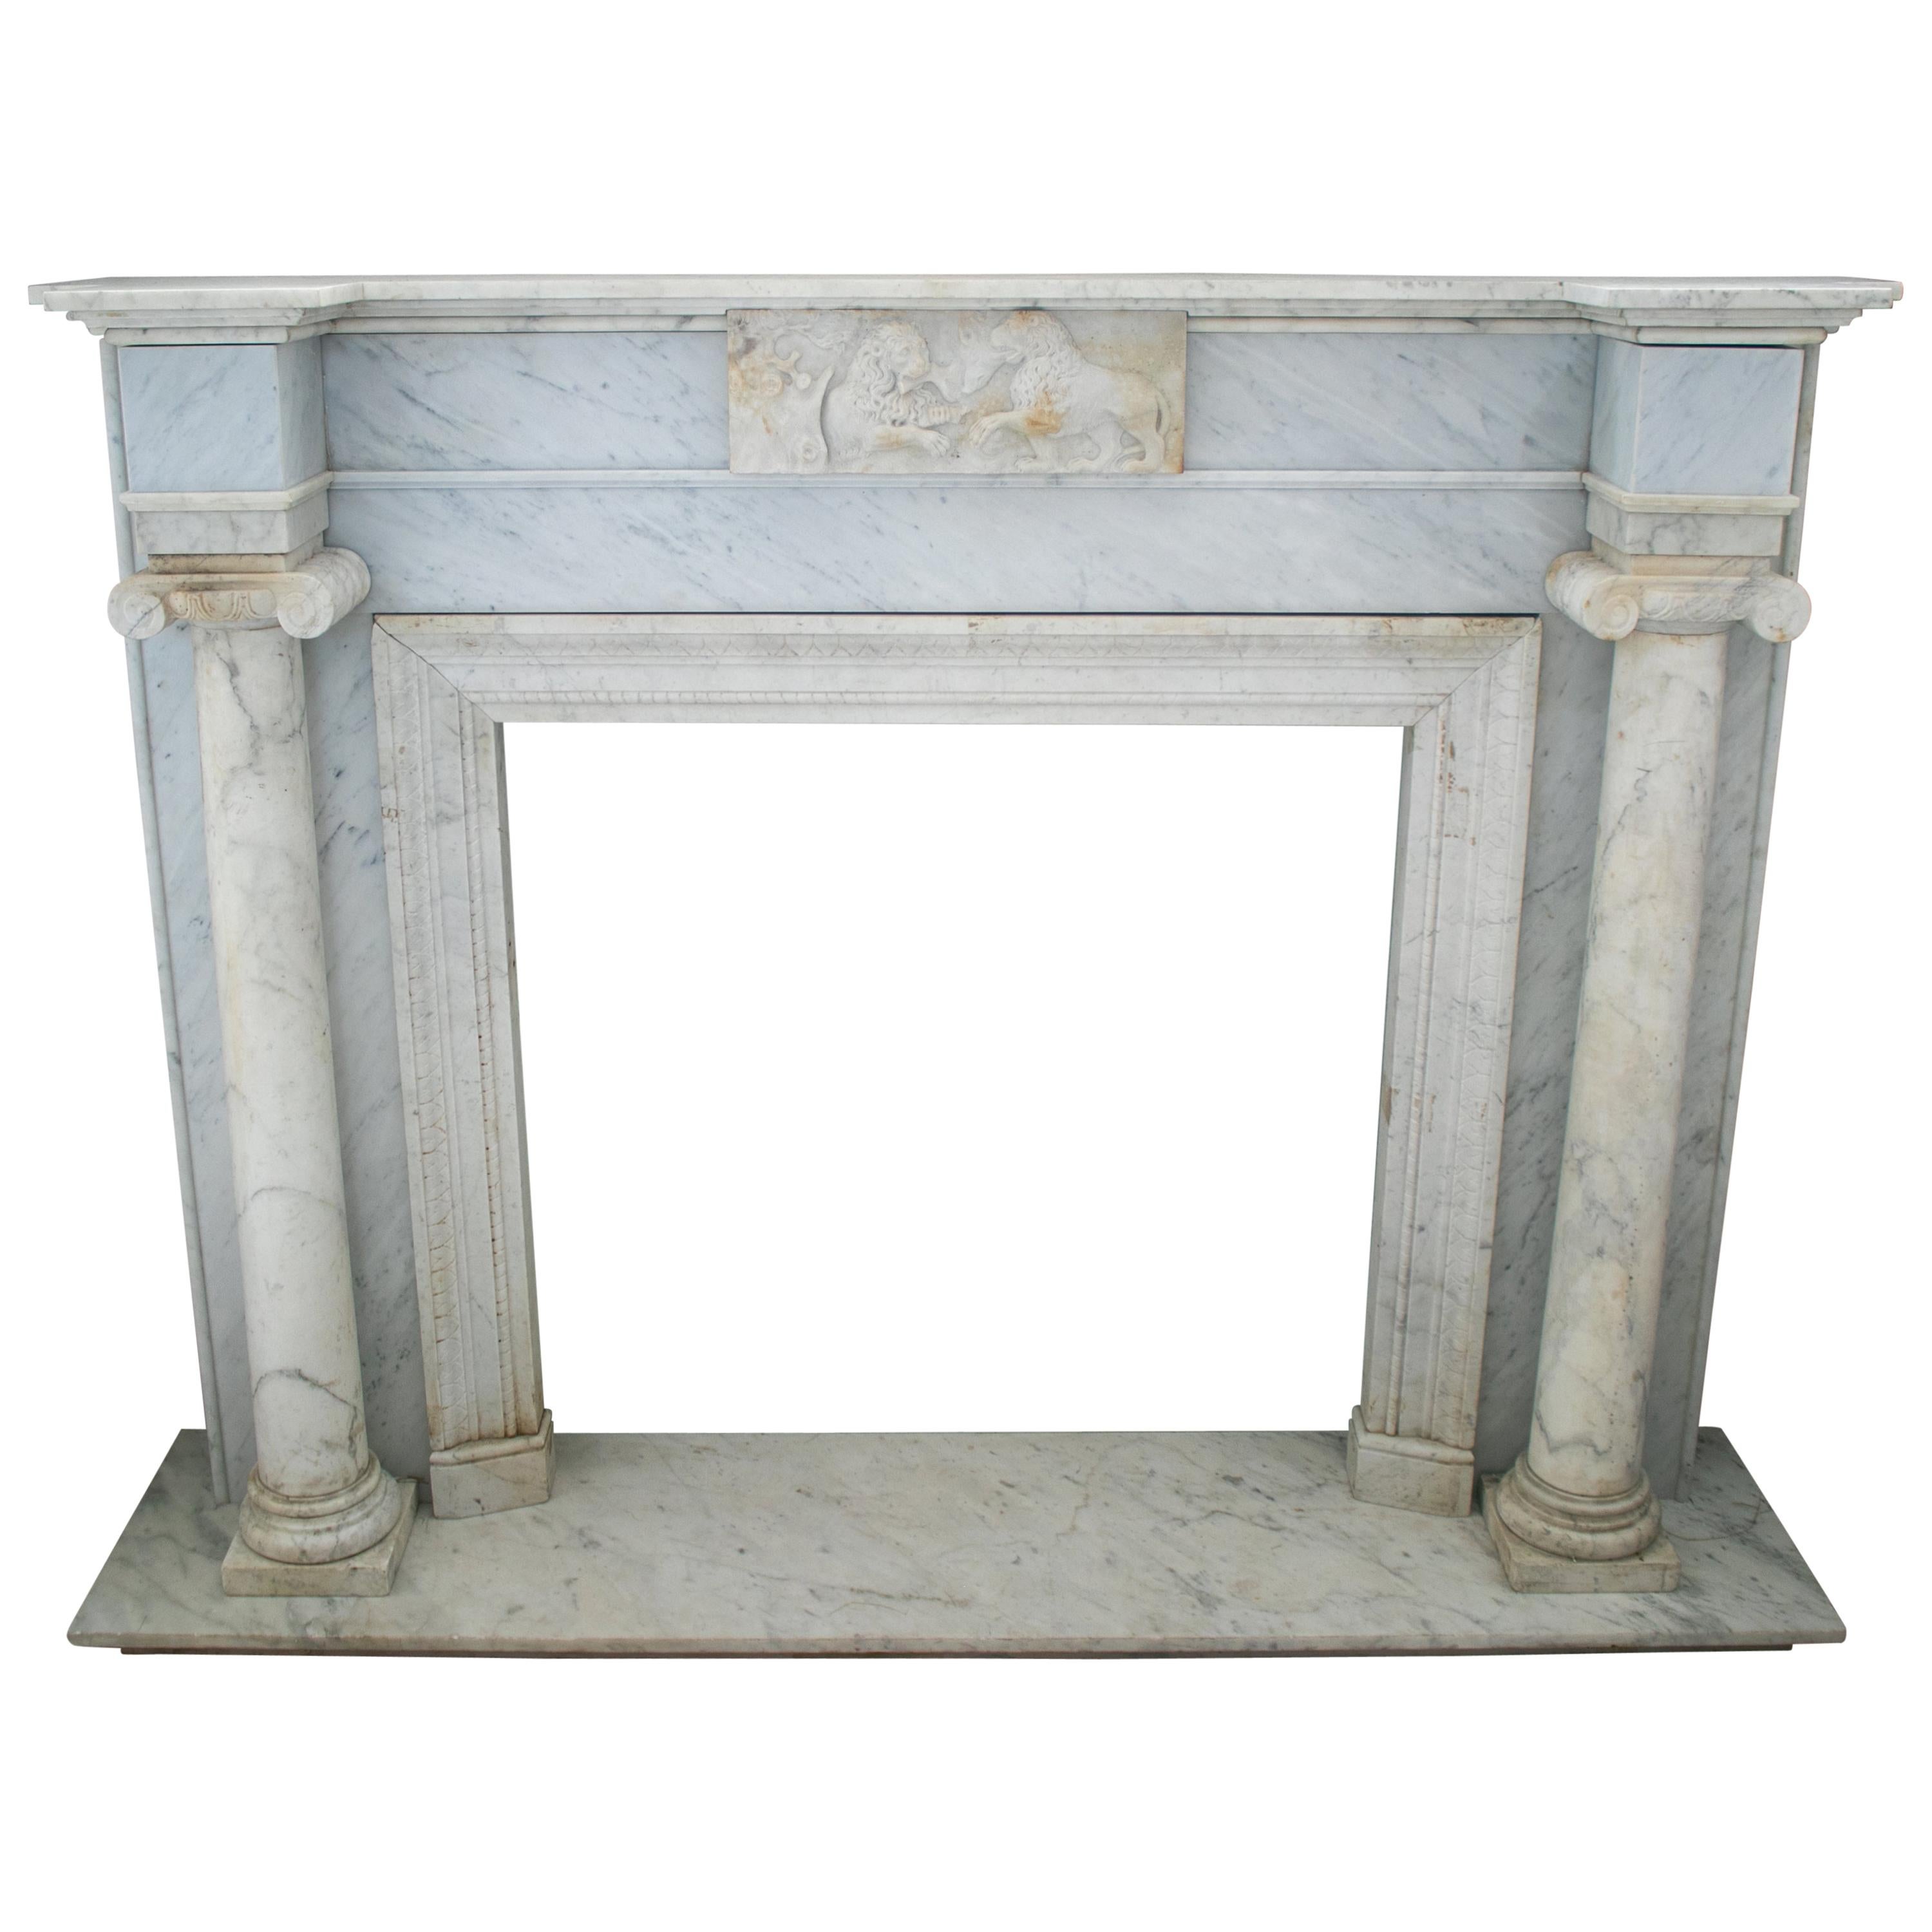 1950s English Hand Carved Marble Fireplace with Ionic Columns